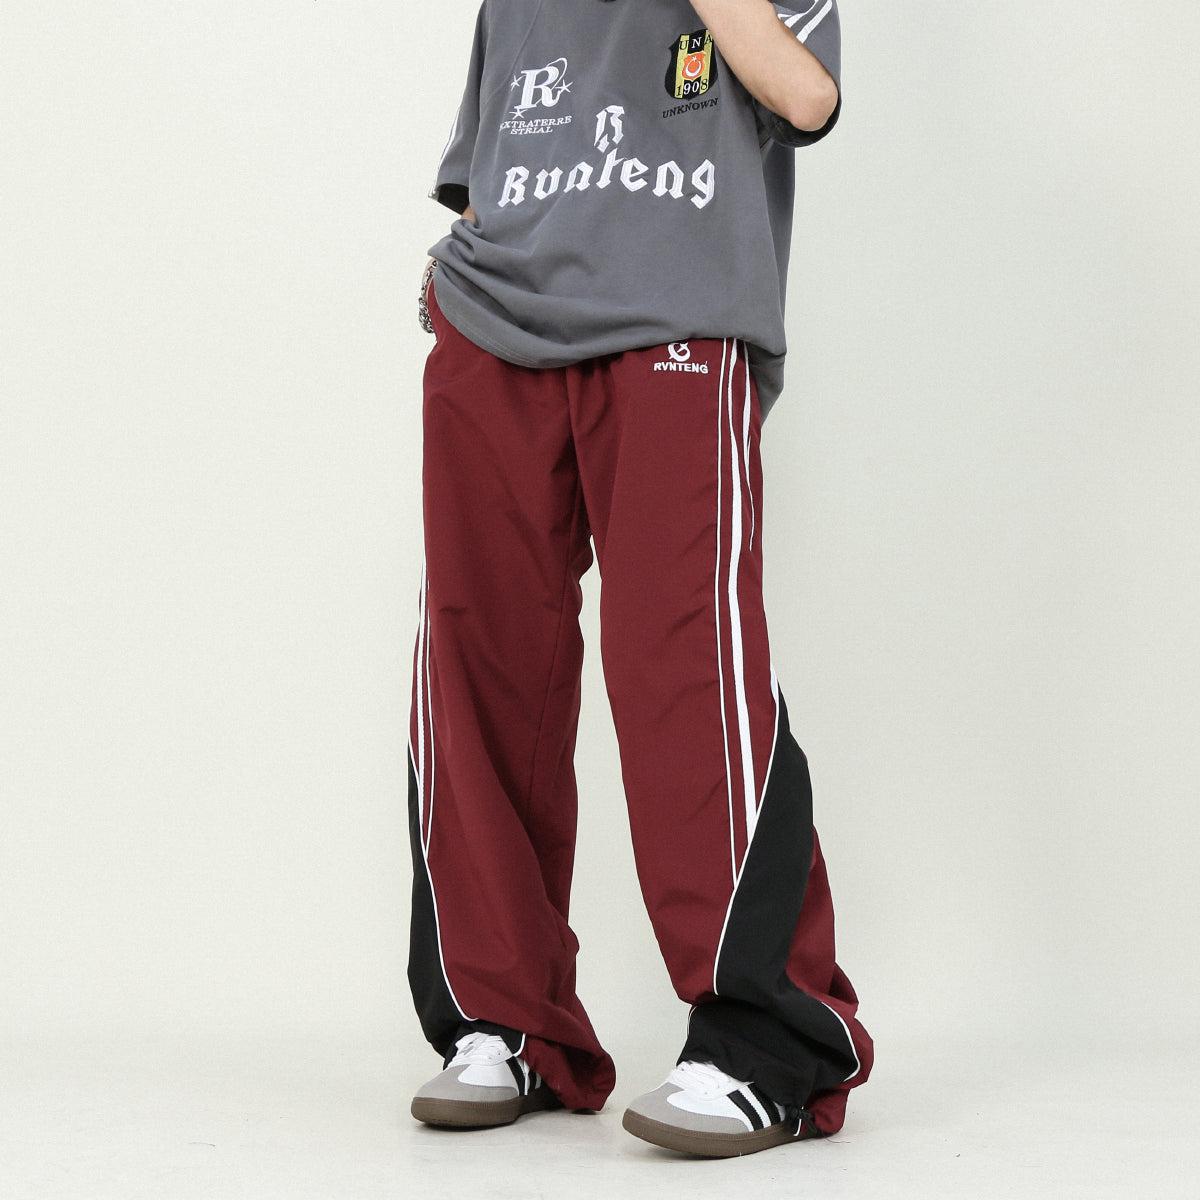 BHARATH FASHION Track Pant For Boys Price in India - Buy BHARATH FASHION  Track Pant For Boys online at Flipkart.com